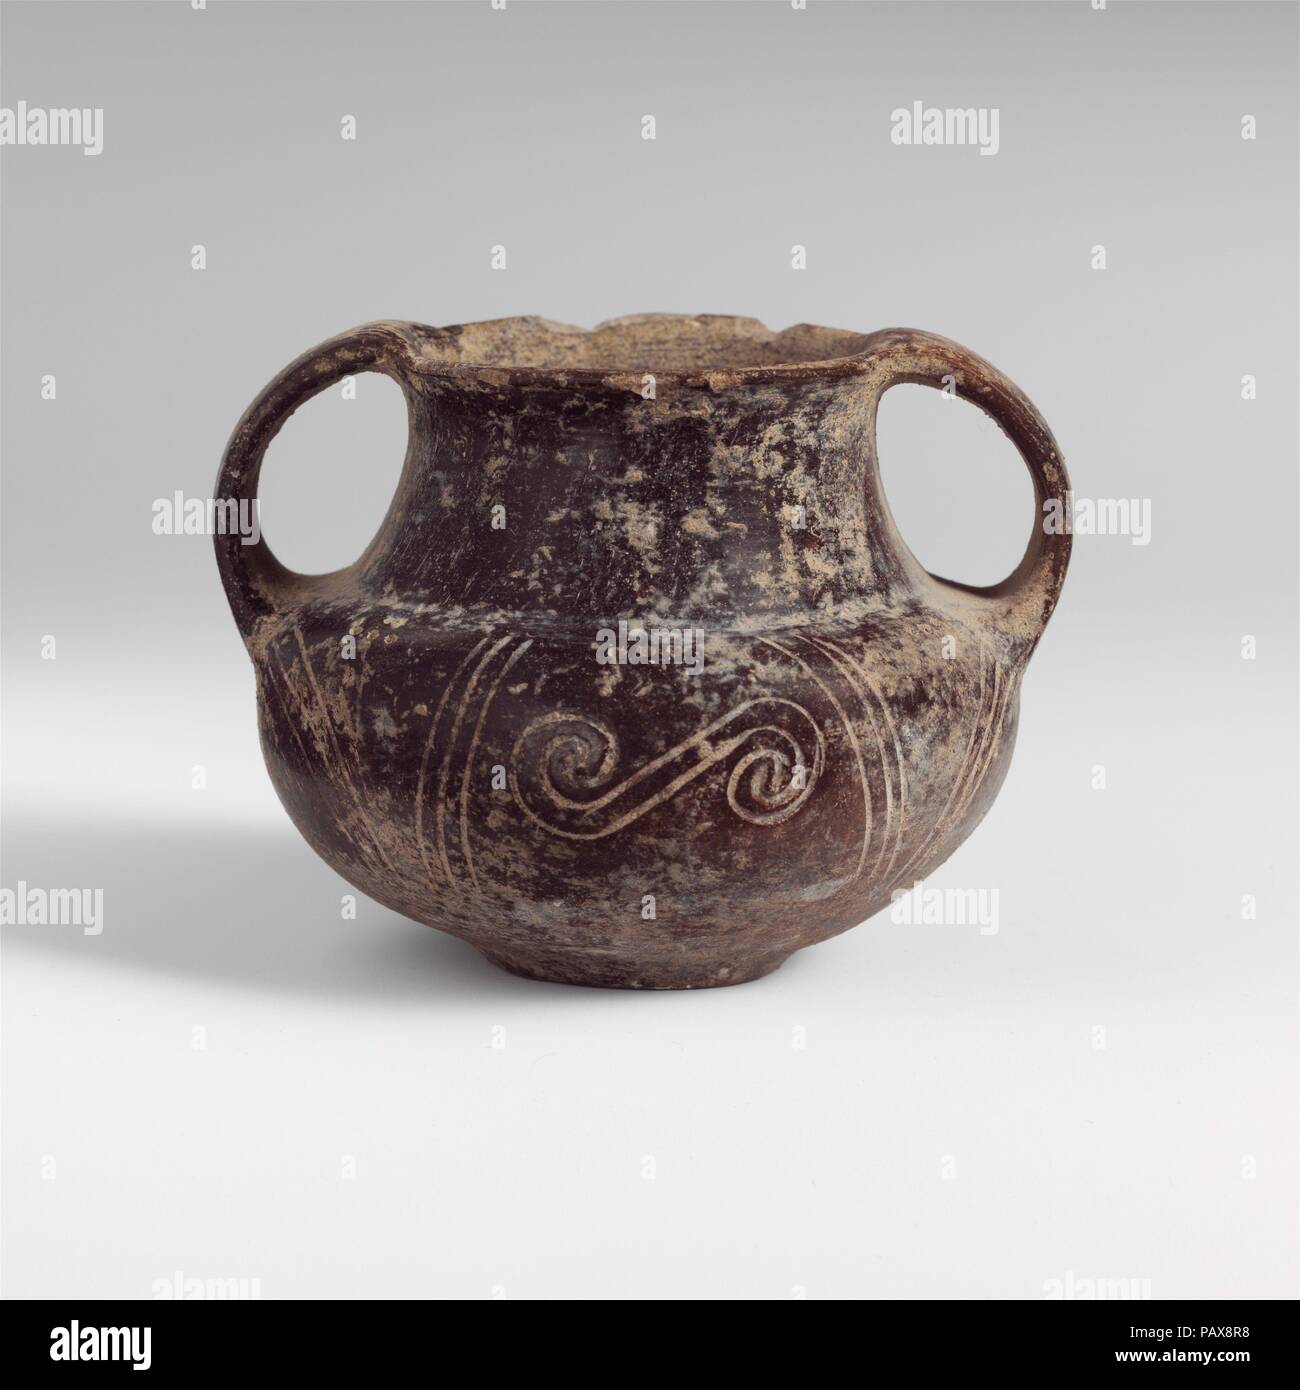 Terracotta two-handled jar. Culture: Italic, Villanovan. Dimensions: H. 2 5/8 in. (6.7 cm). Date: early 7th-mid 7th century BC.  Reddish-brown, two-handled, with incised curvilinear decoration. Museum: Metropolitan Museum of Art, New York, USA. Stock Photo